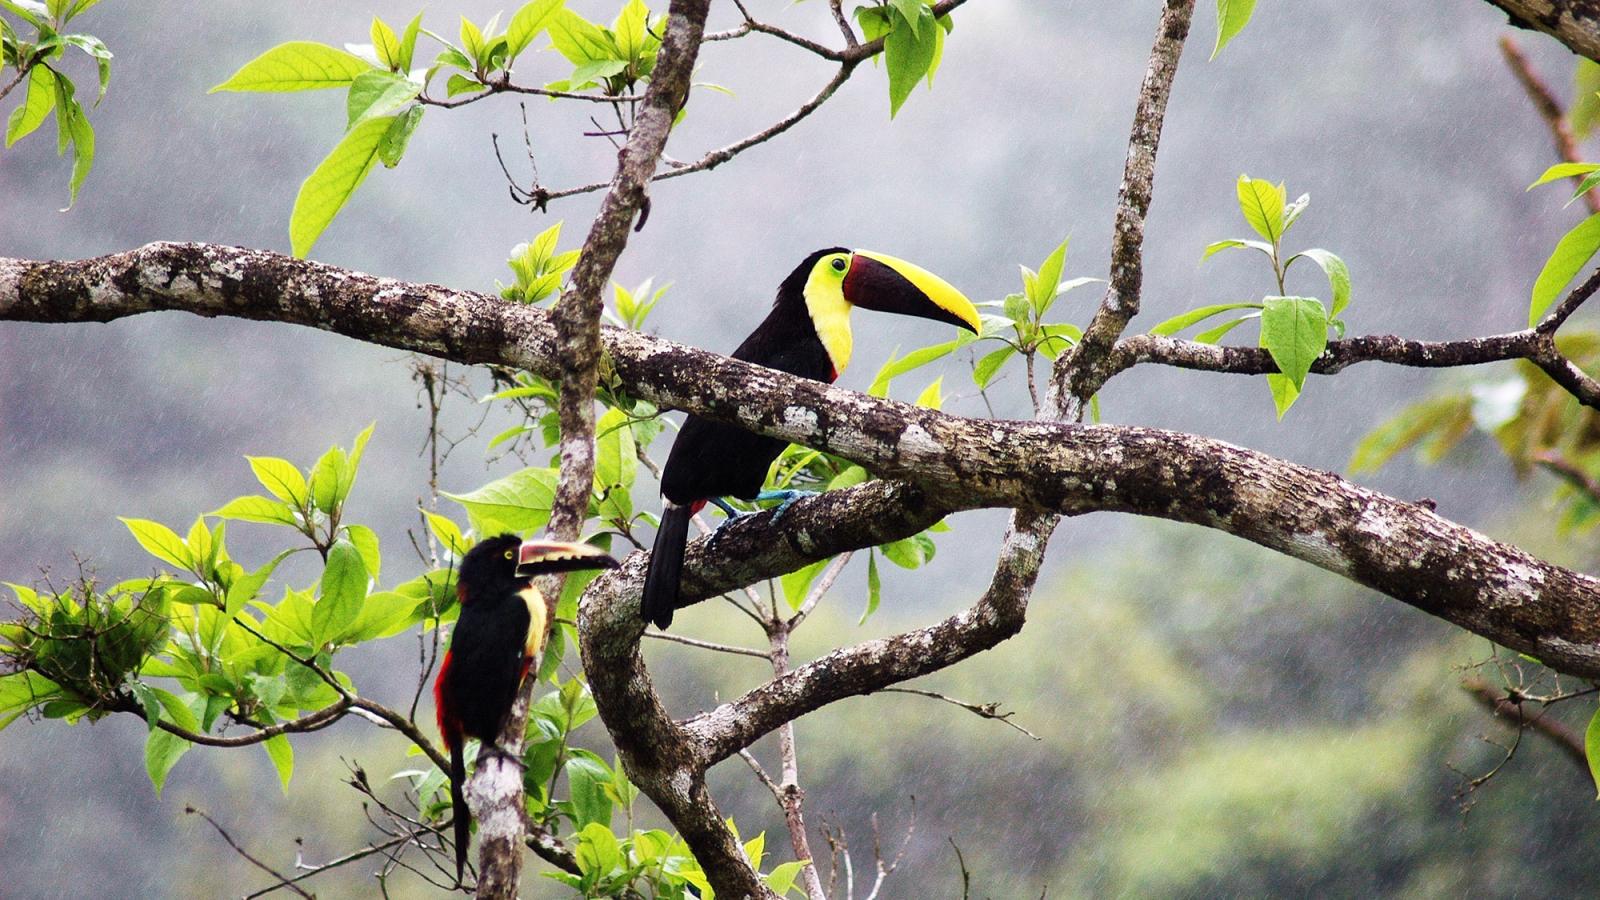 Toucan in a managed forest near the University of Peace in Costa Rica for Pace University's 3+2 Biology with Ecology and Society program